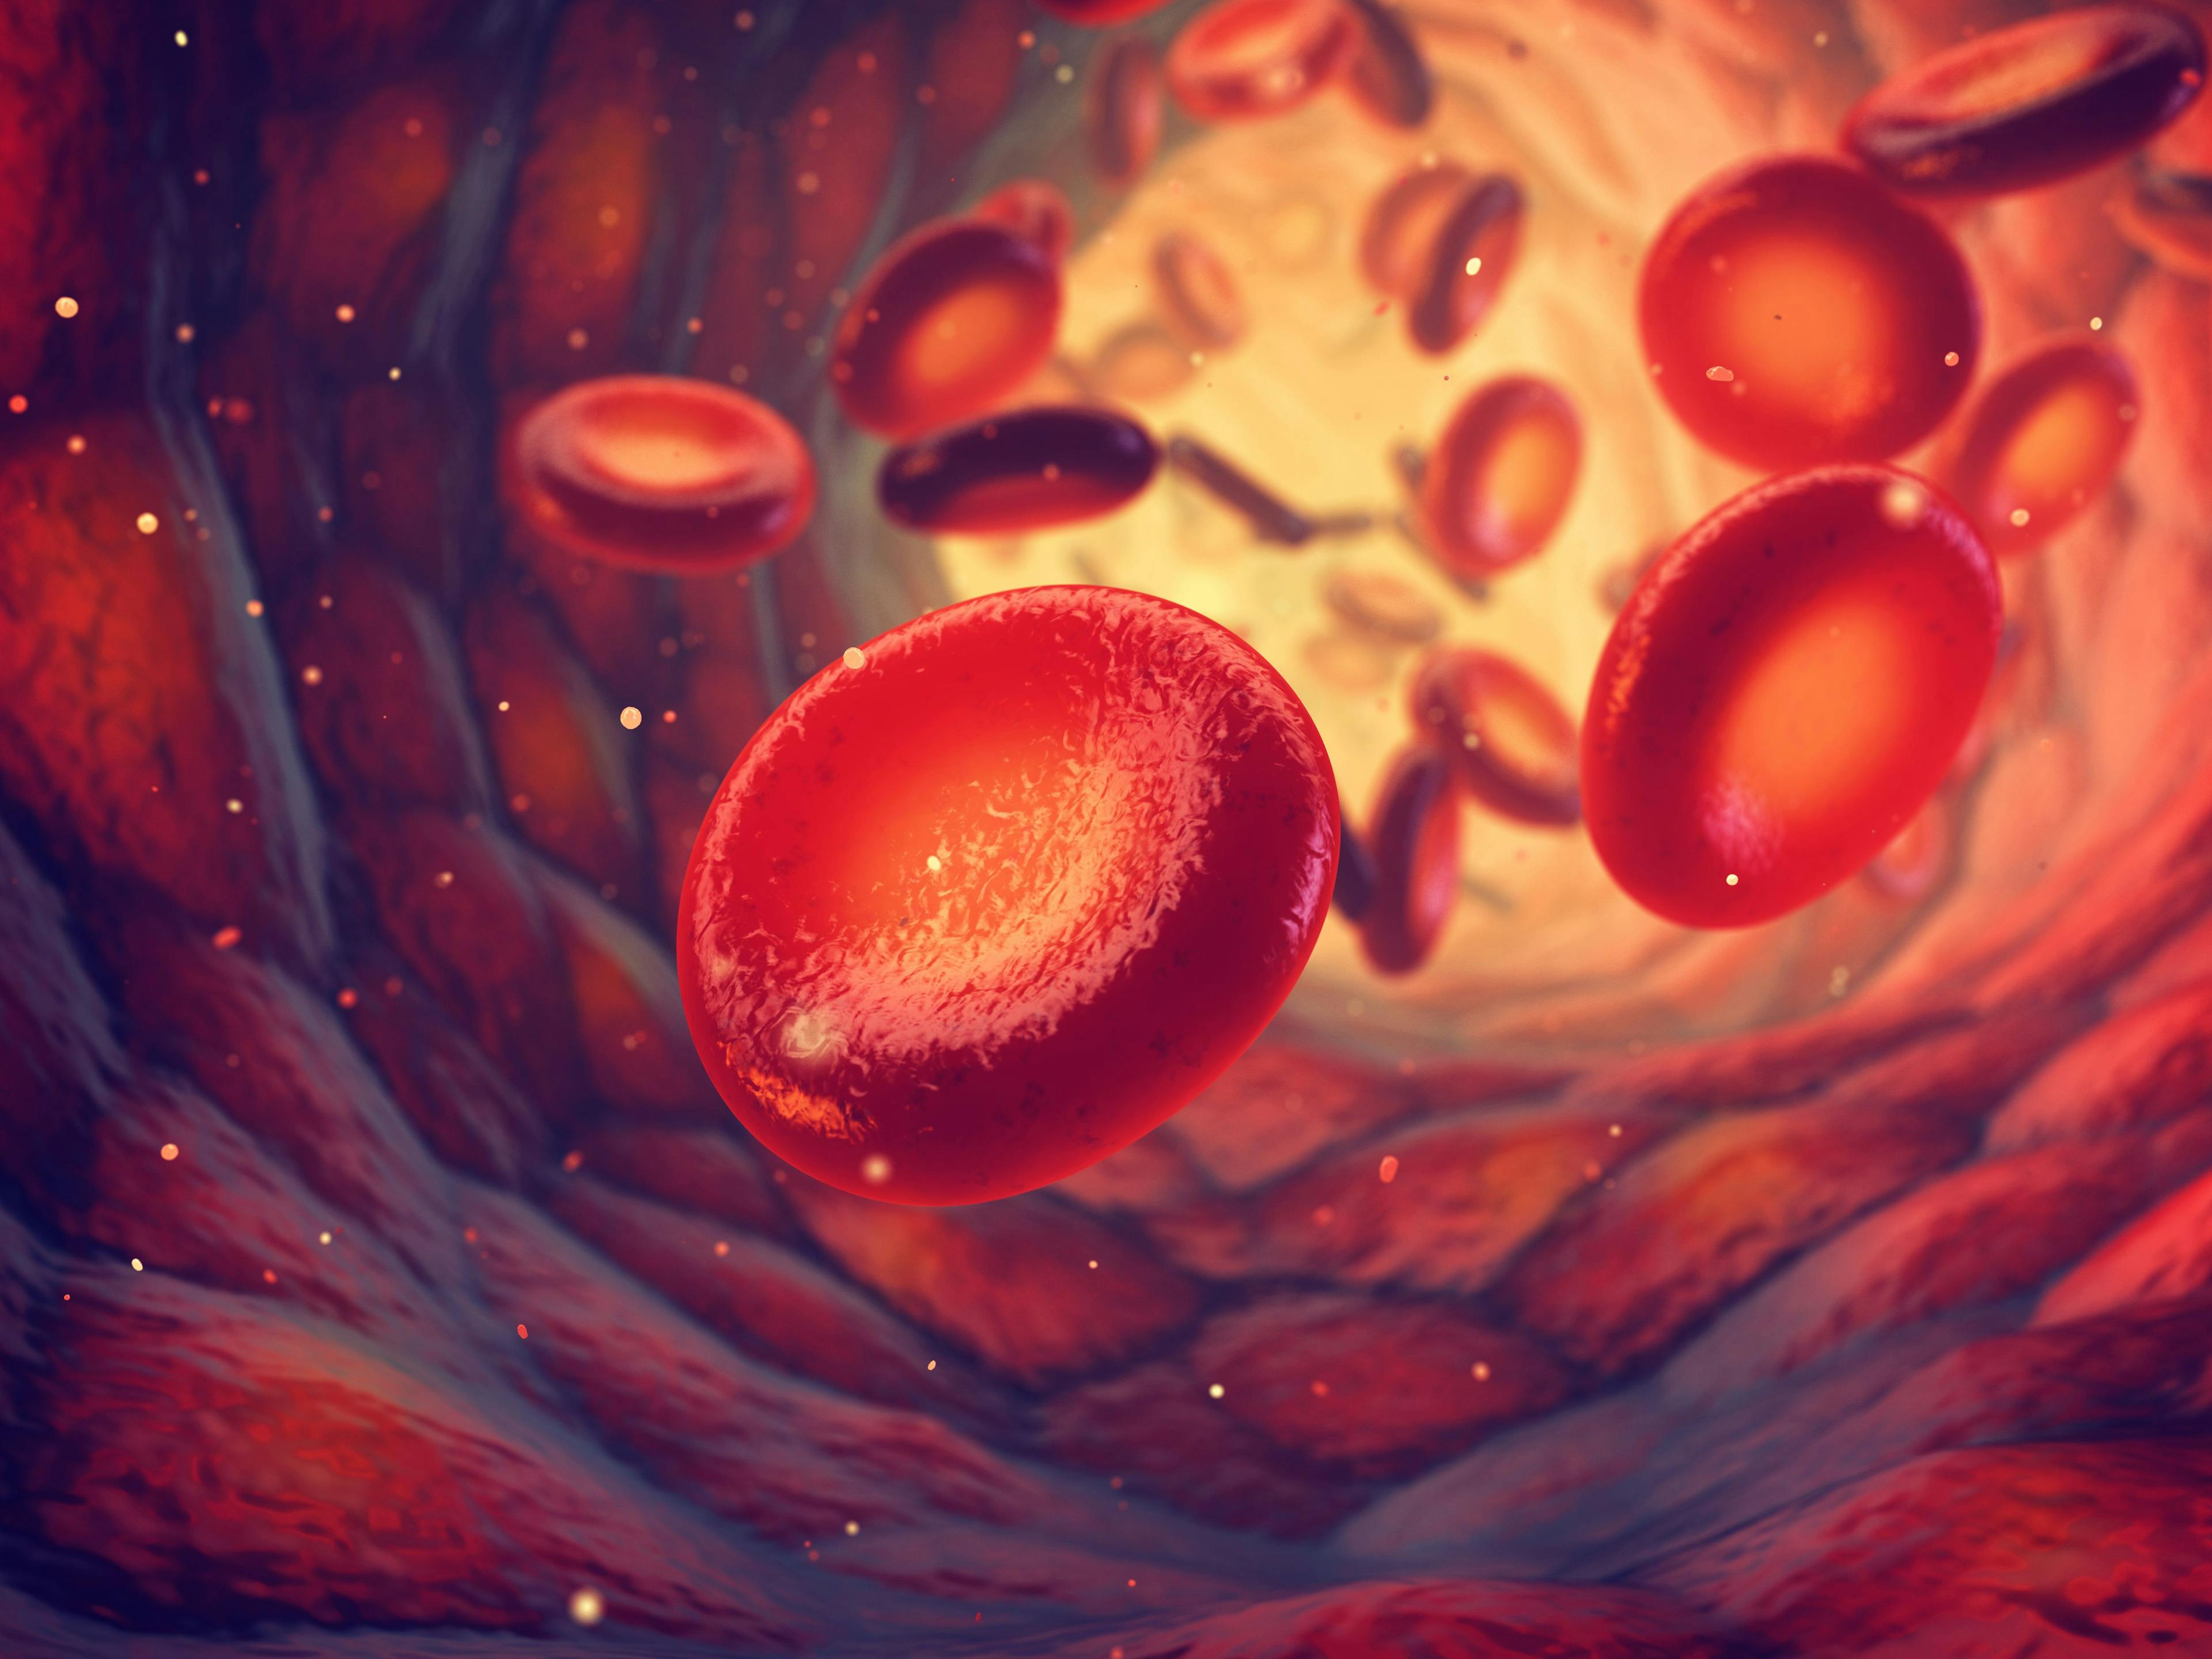 New Drug That Selectively Targets Blood Cancer Cells is Set for Human Trials